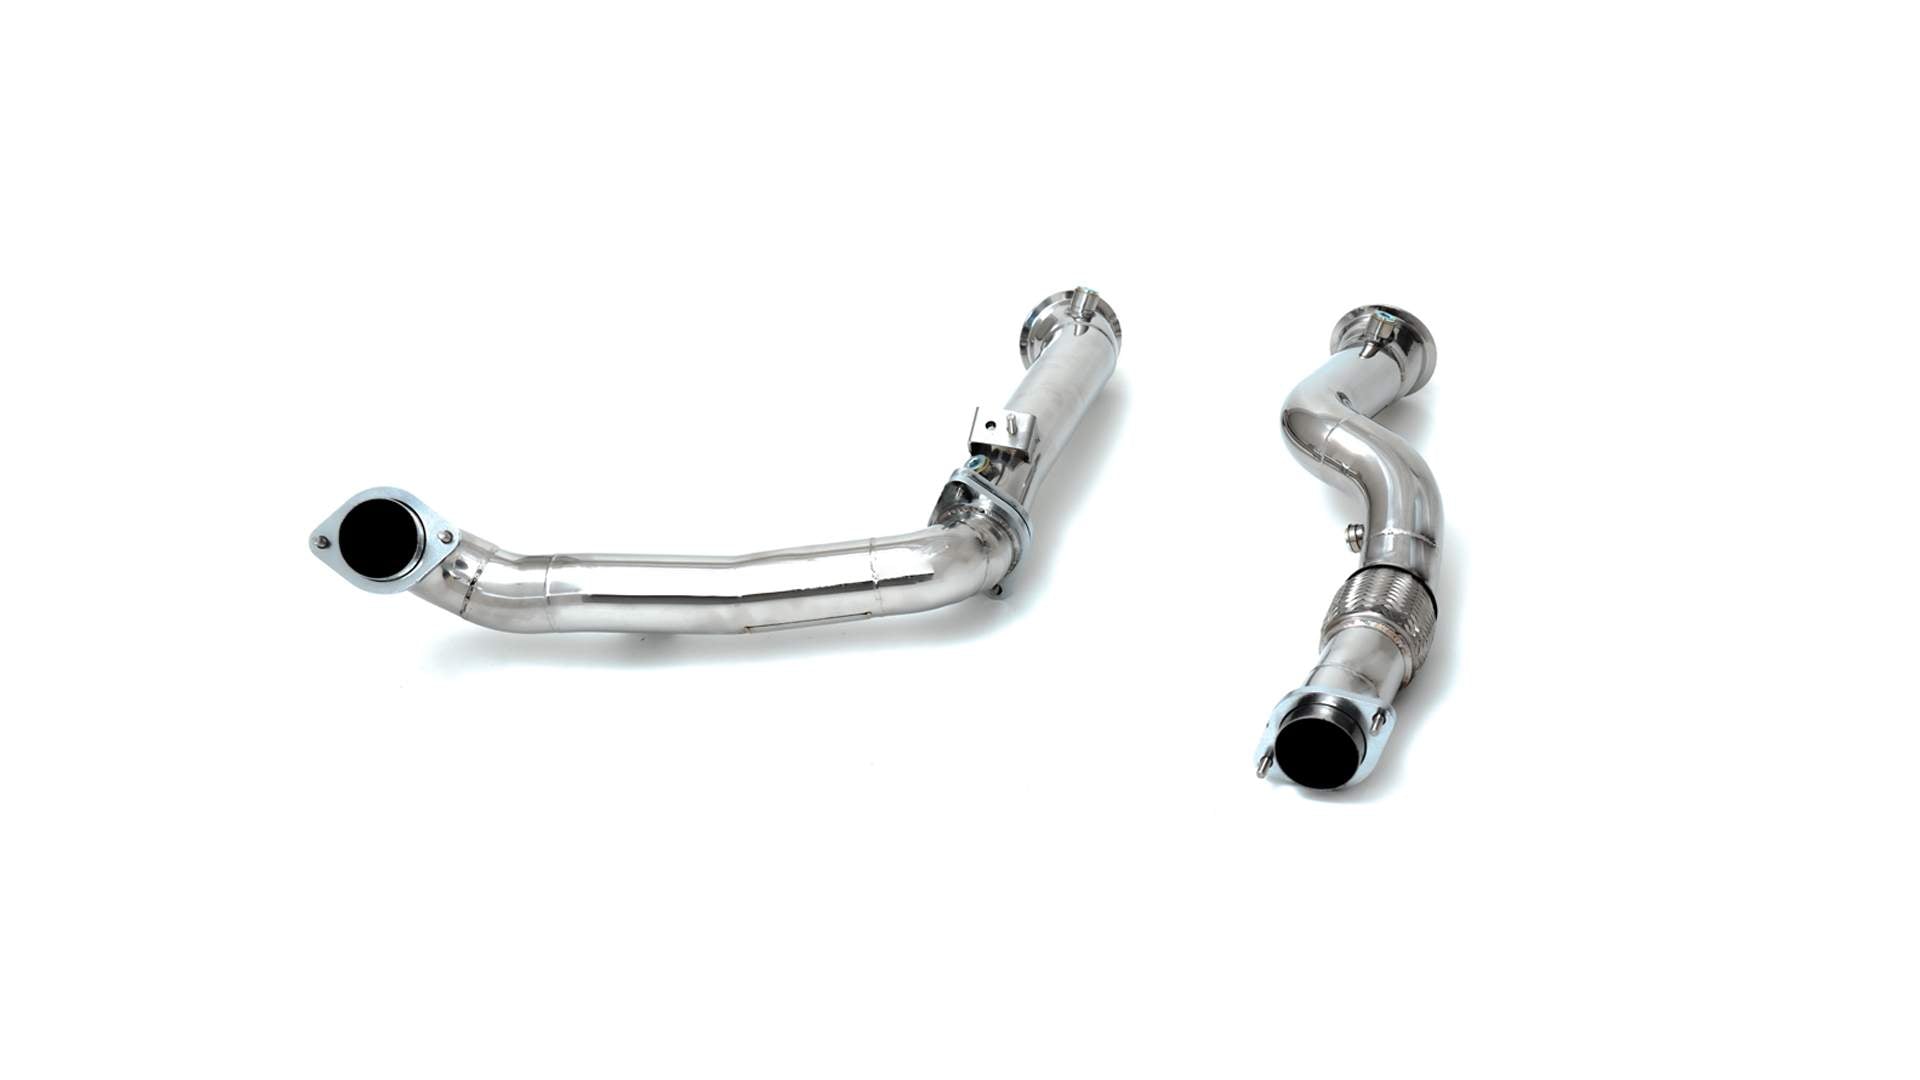 BMW G8x Catless Downpipe